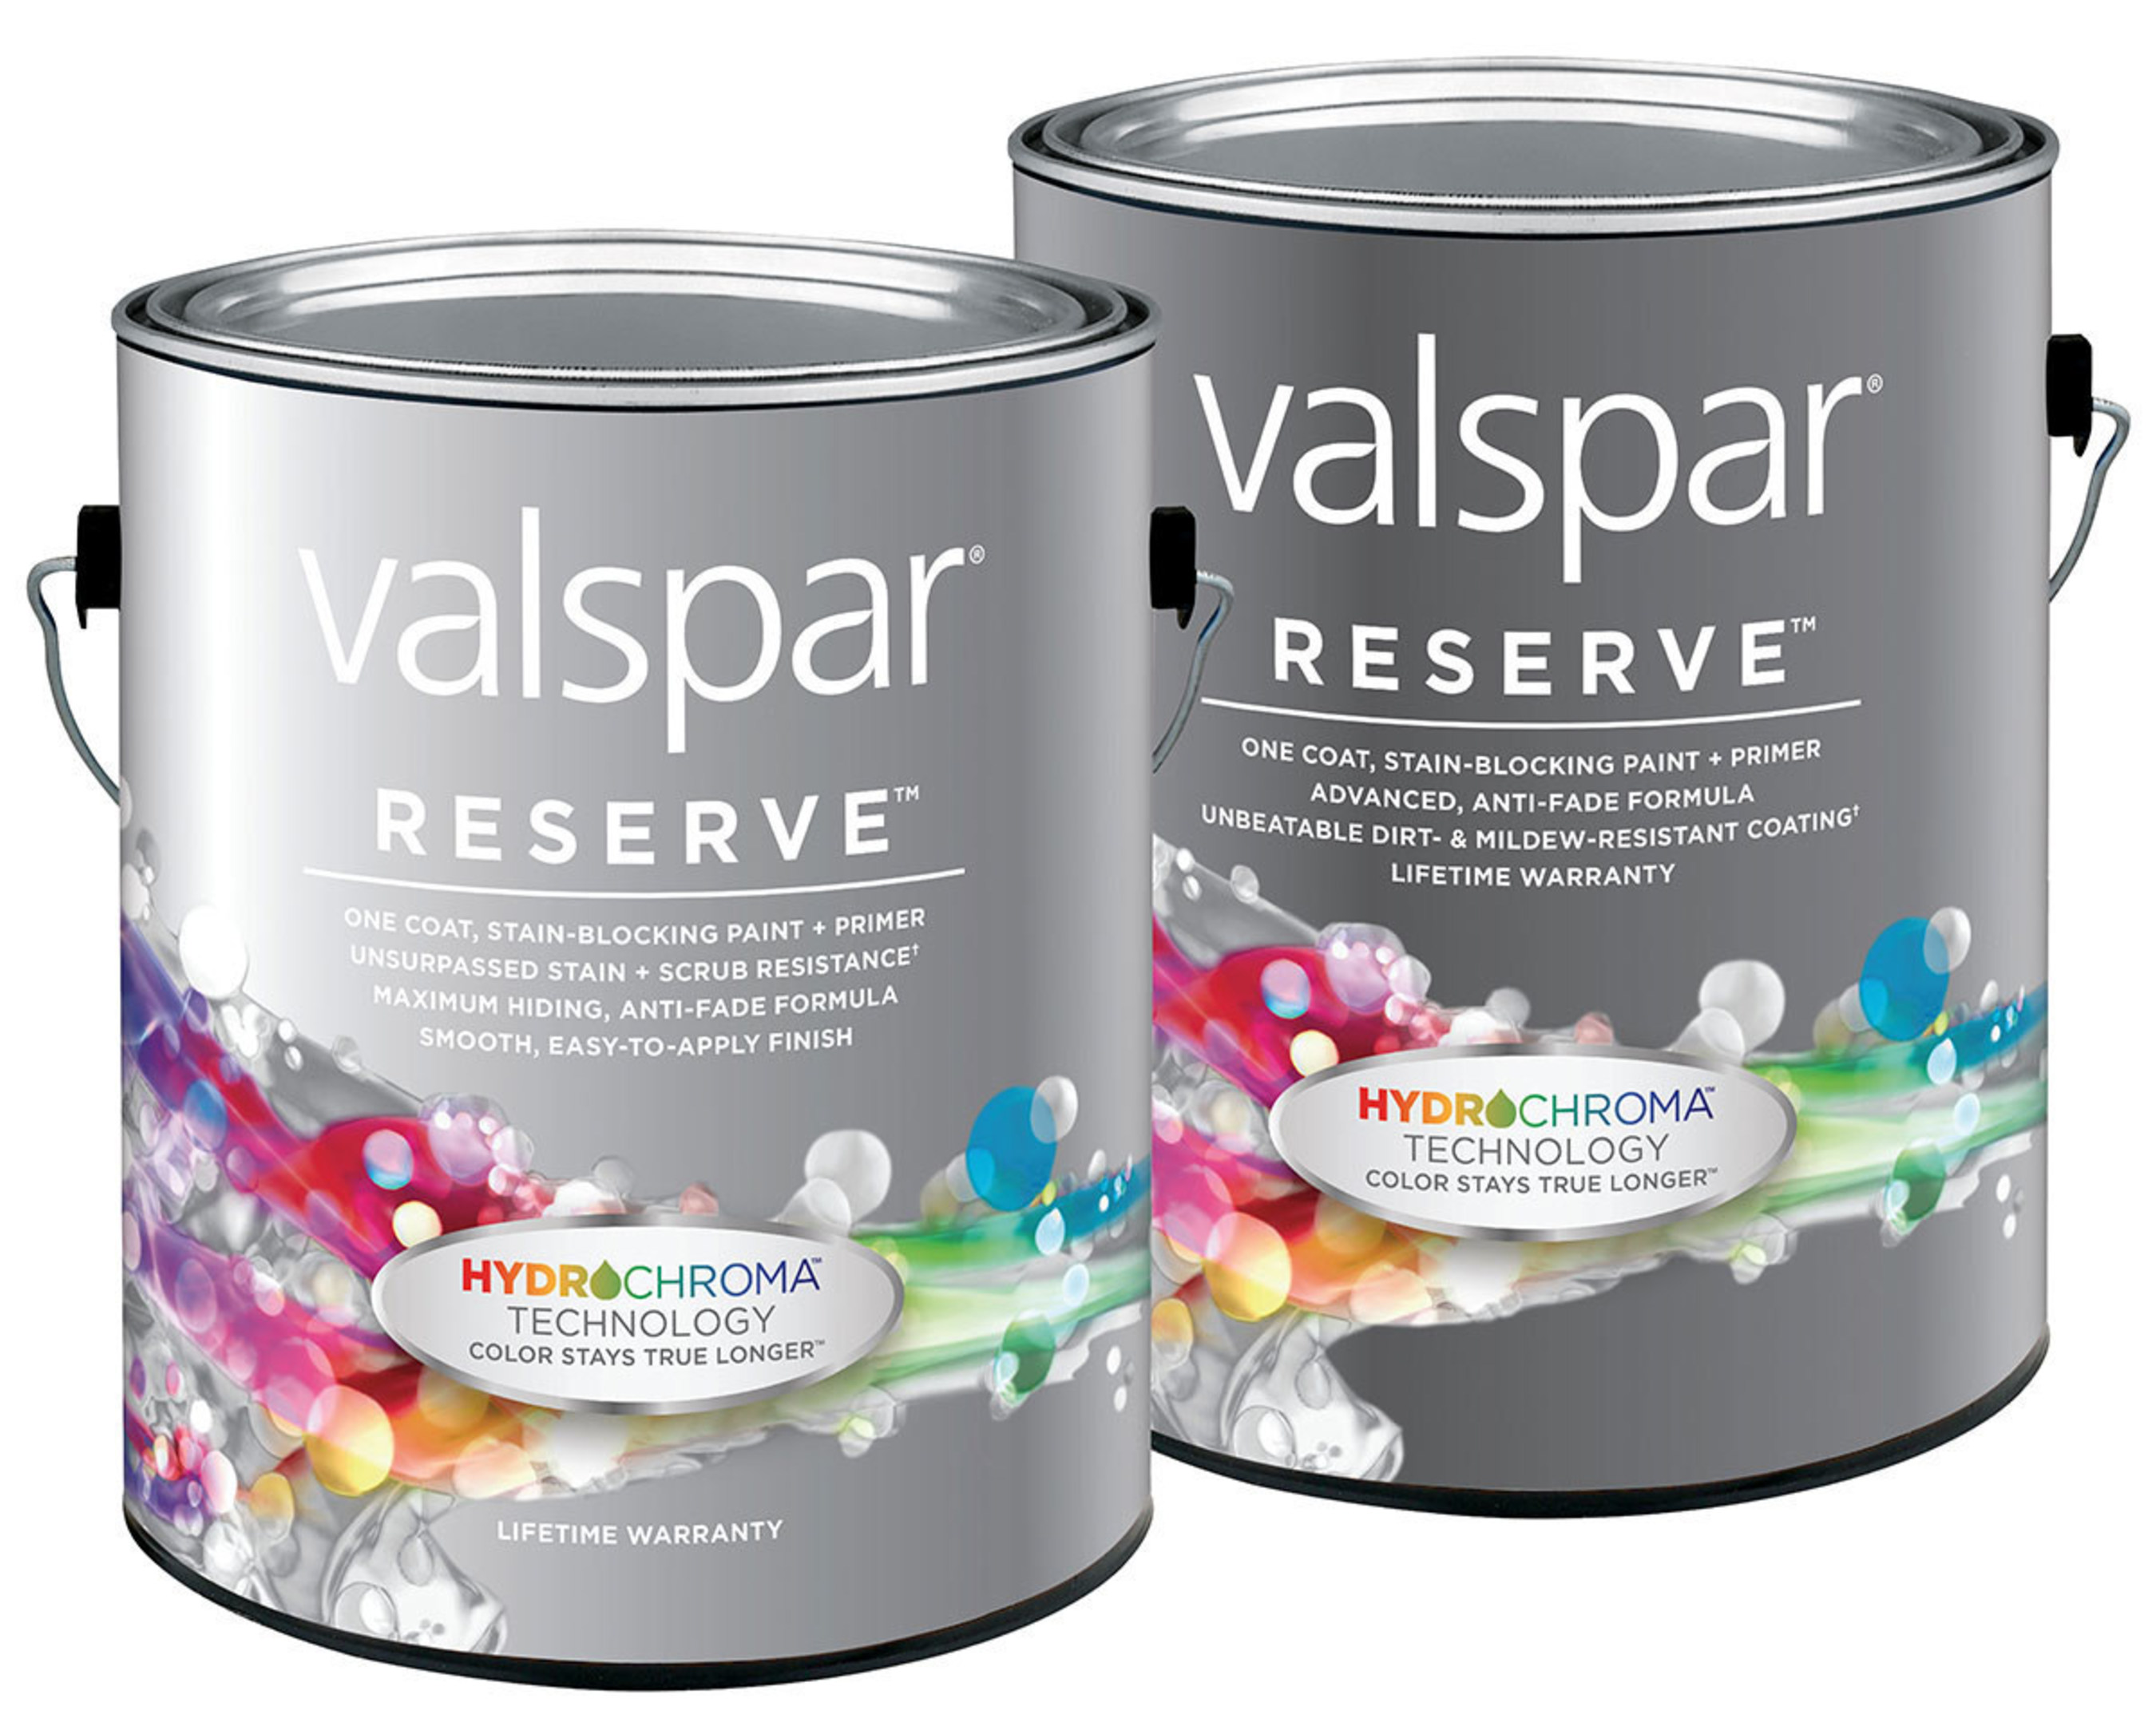 Valspar, the nation's most widely distributed paint brand, has received an Innovative Partner of the Year Award from Lowe's for its introduction of super premium Valspar Reserve® paint.